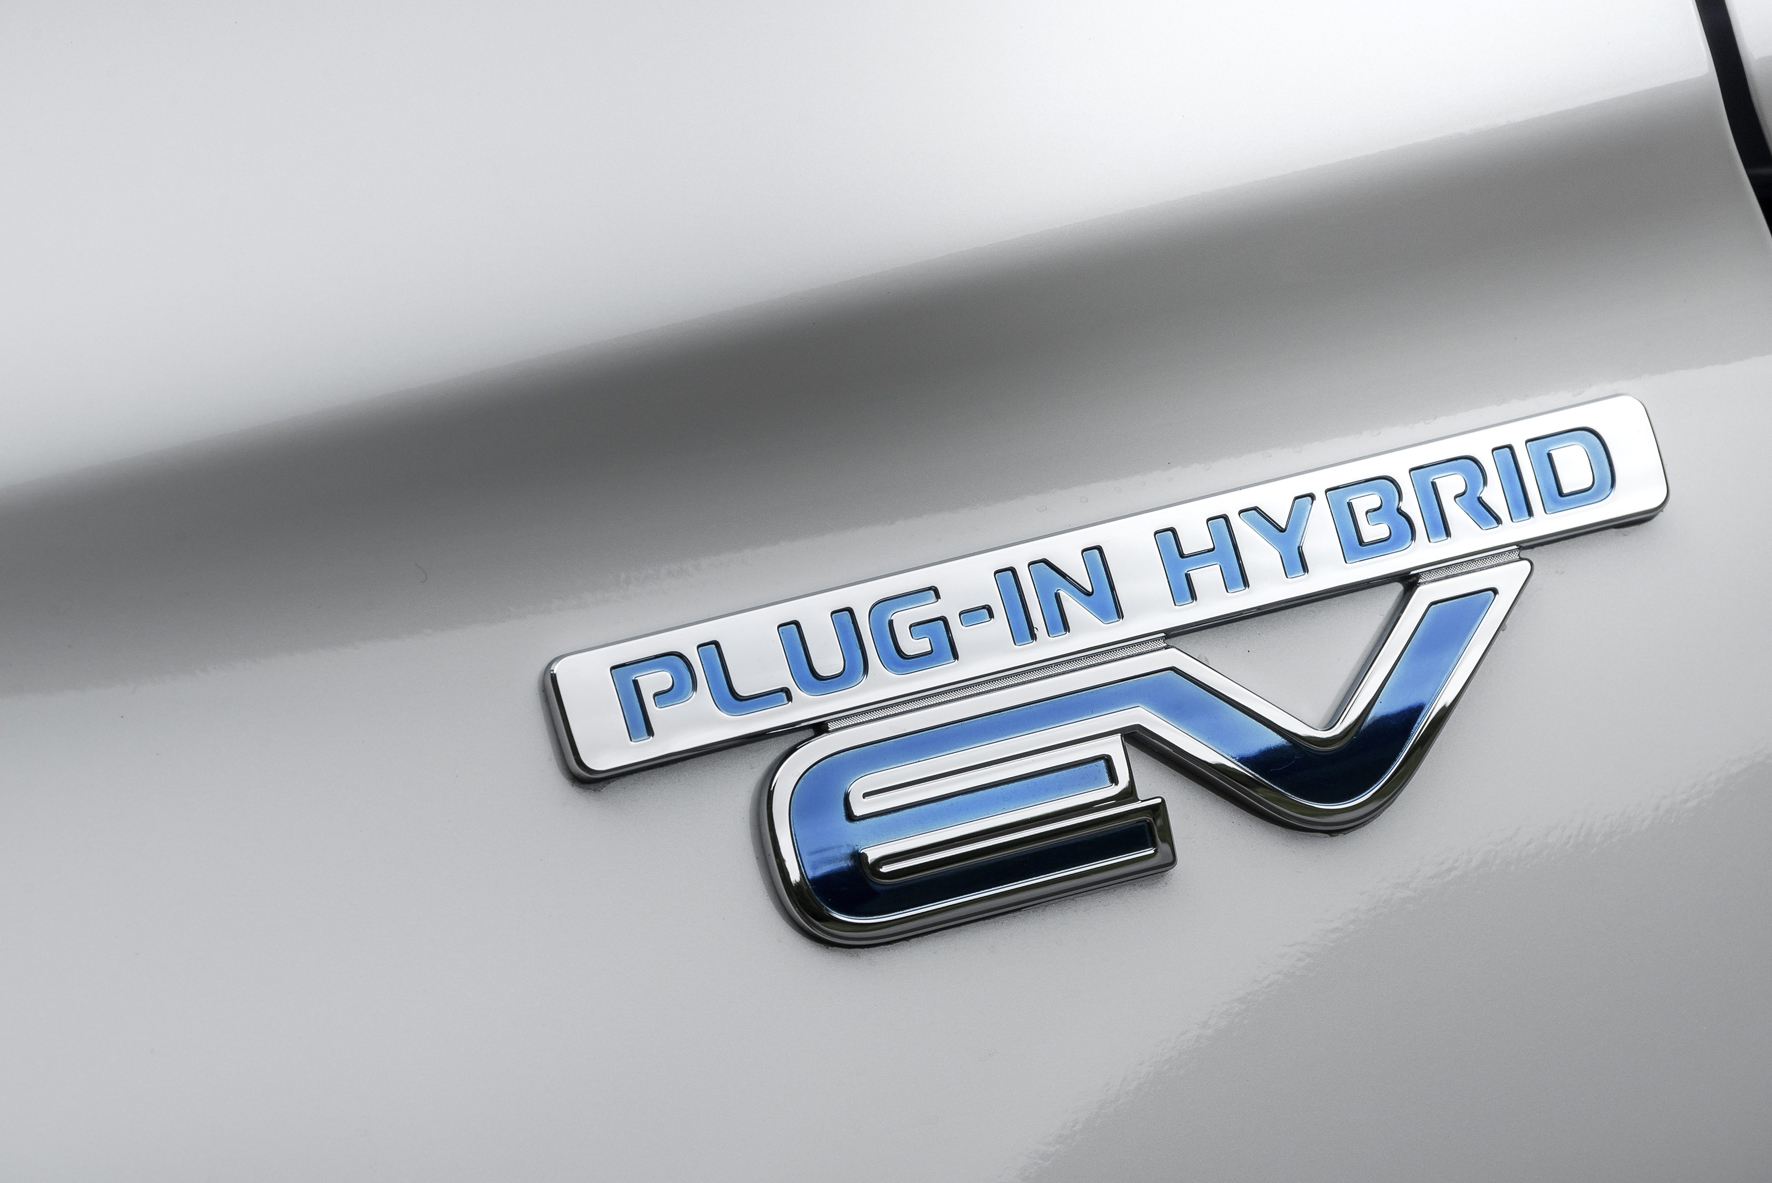 Meet the new and improved Mitsubishi Outlander PHEV